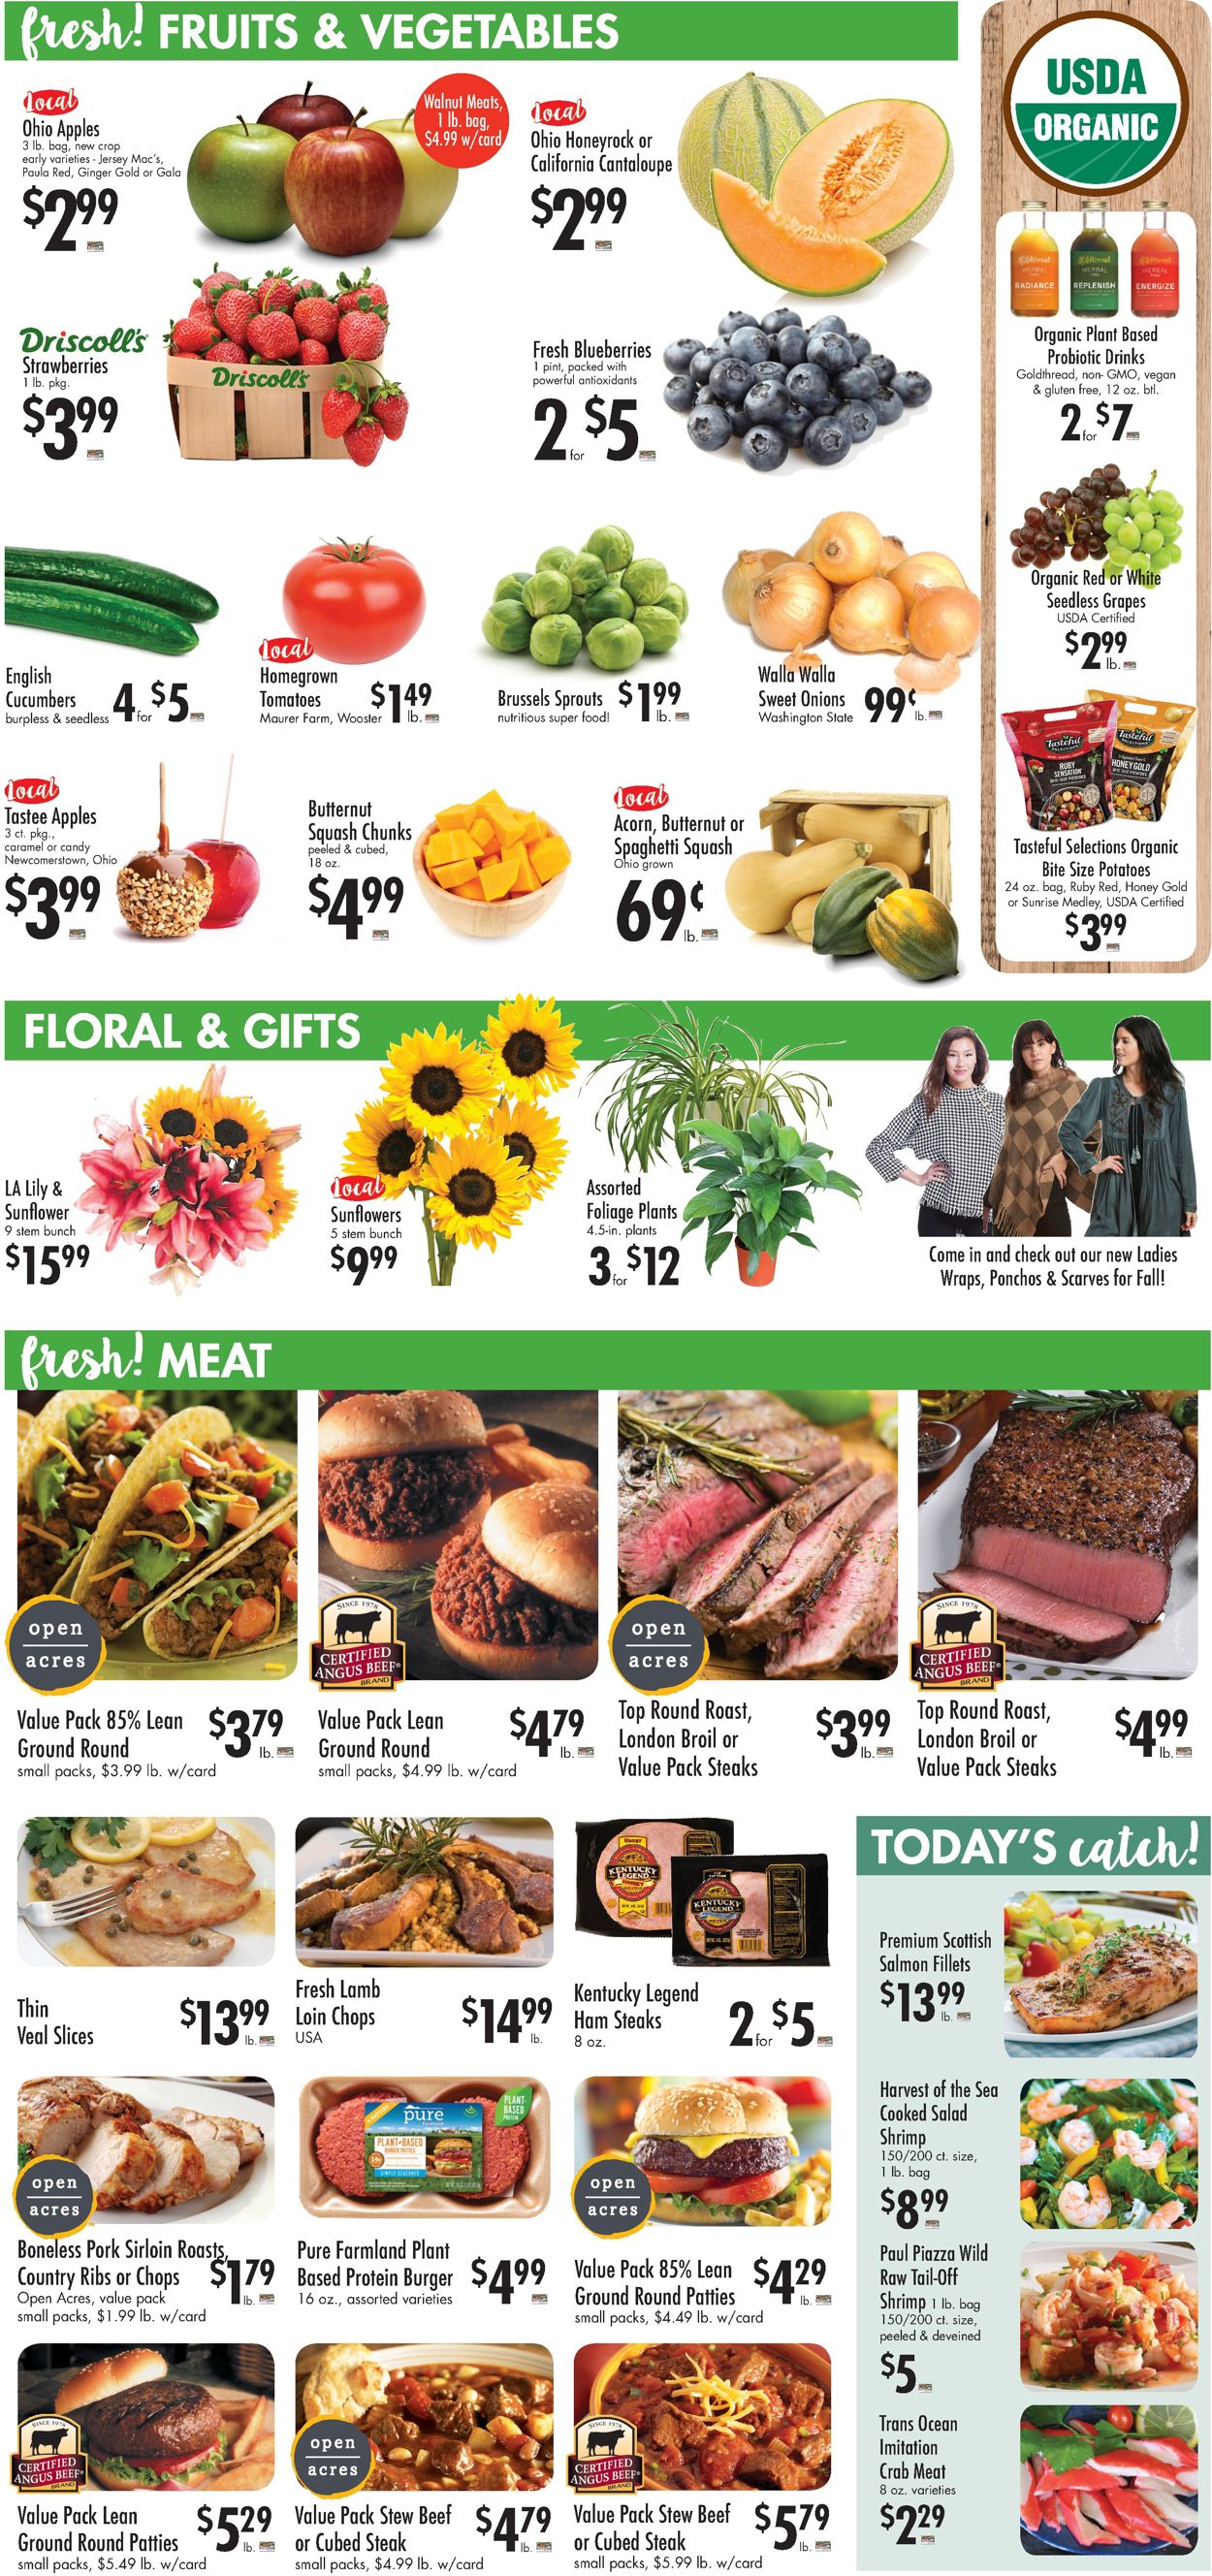 Catalogue Buehler's Fresh Foods from 09/09/2020